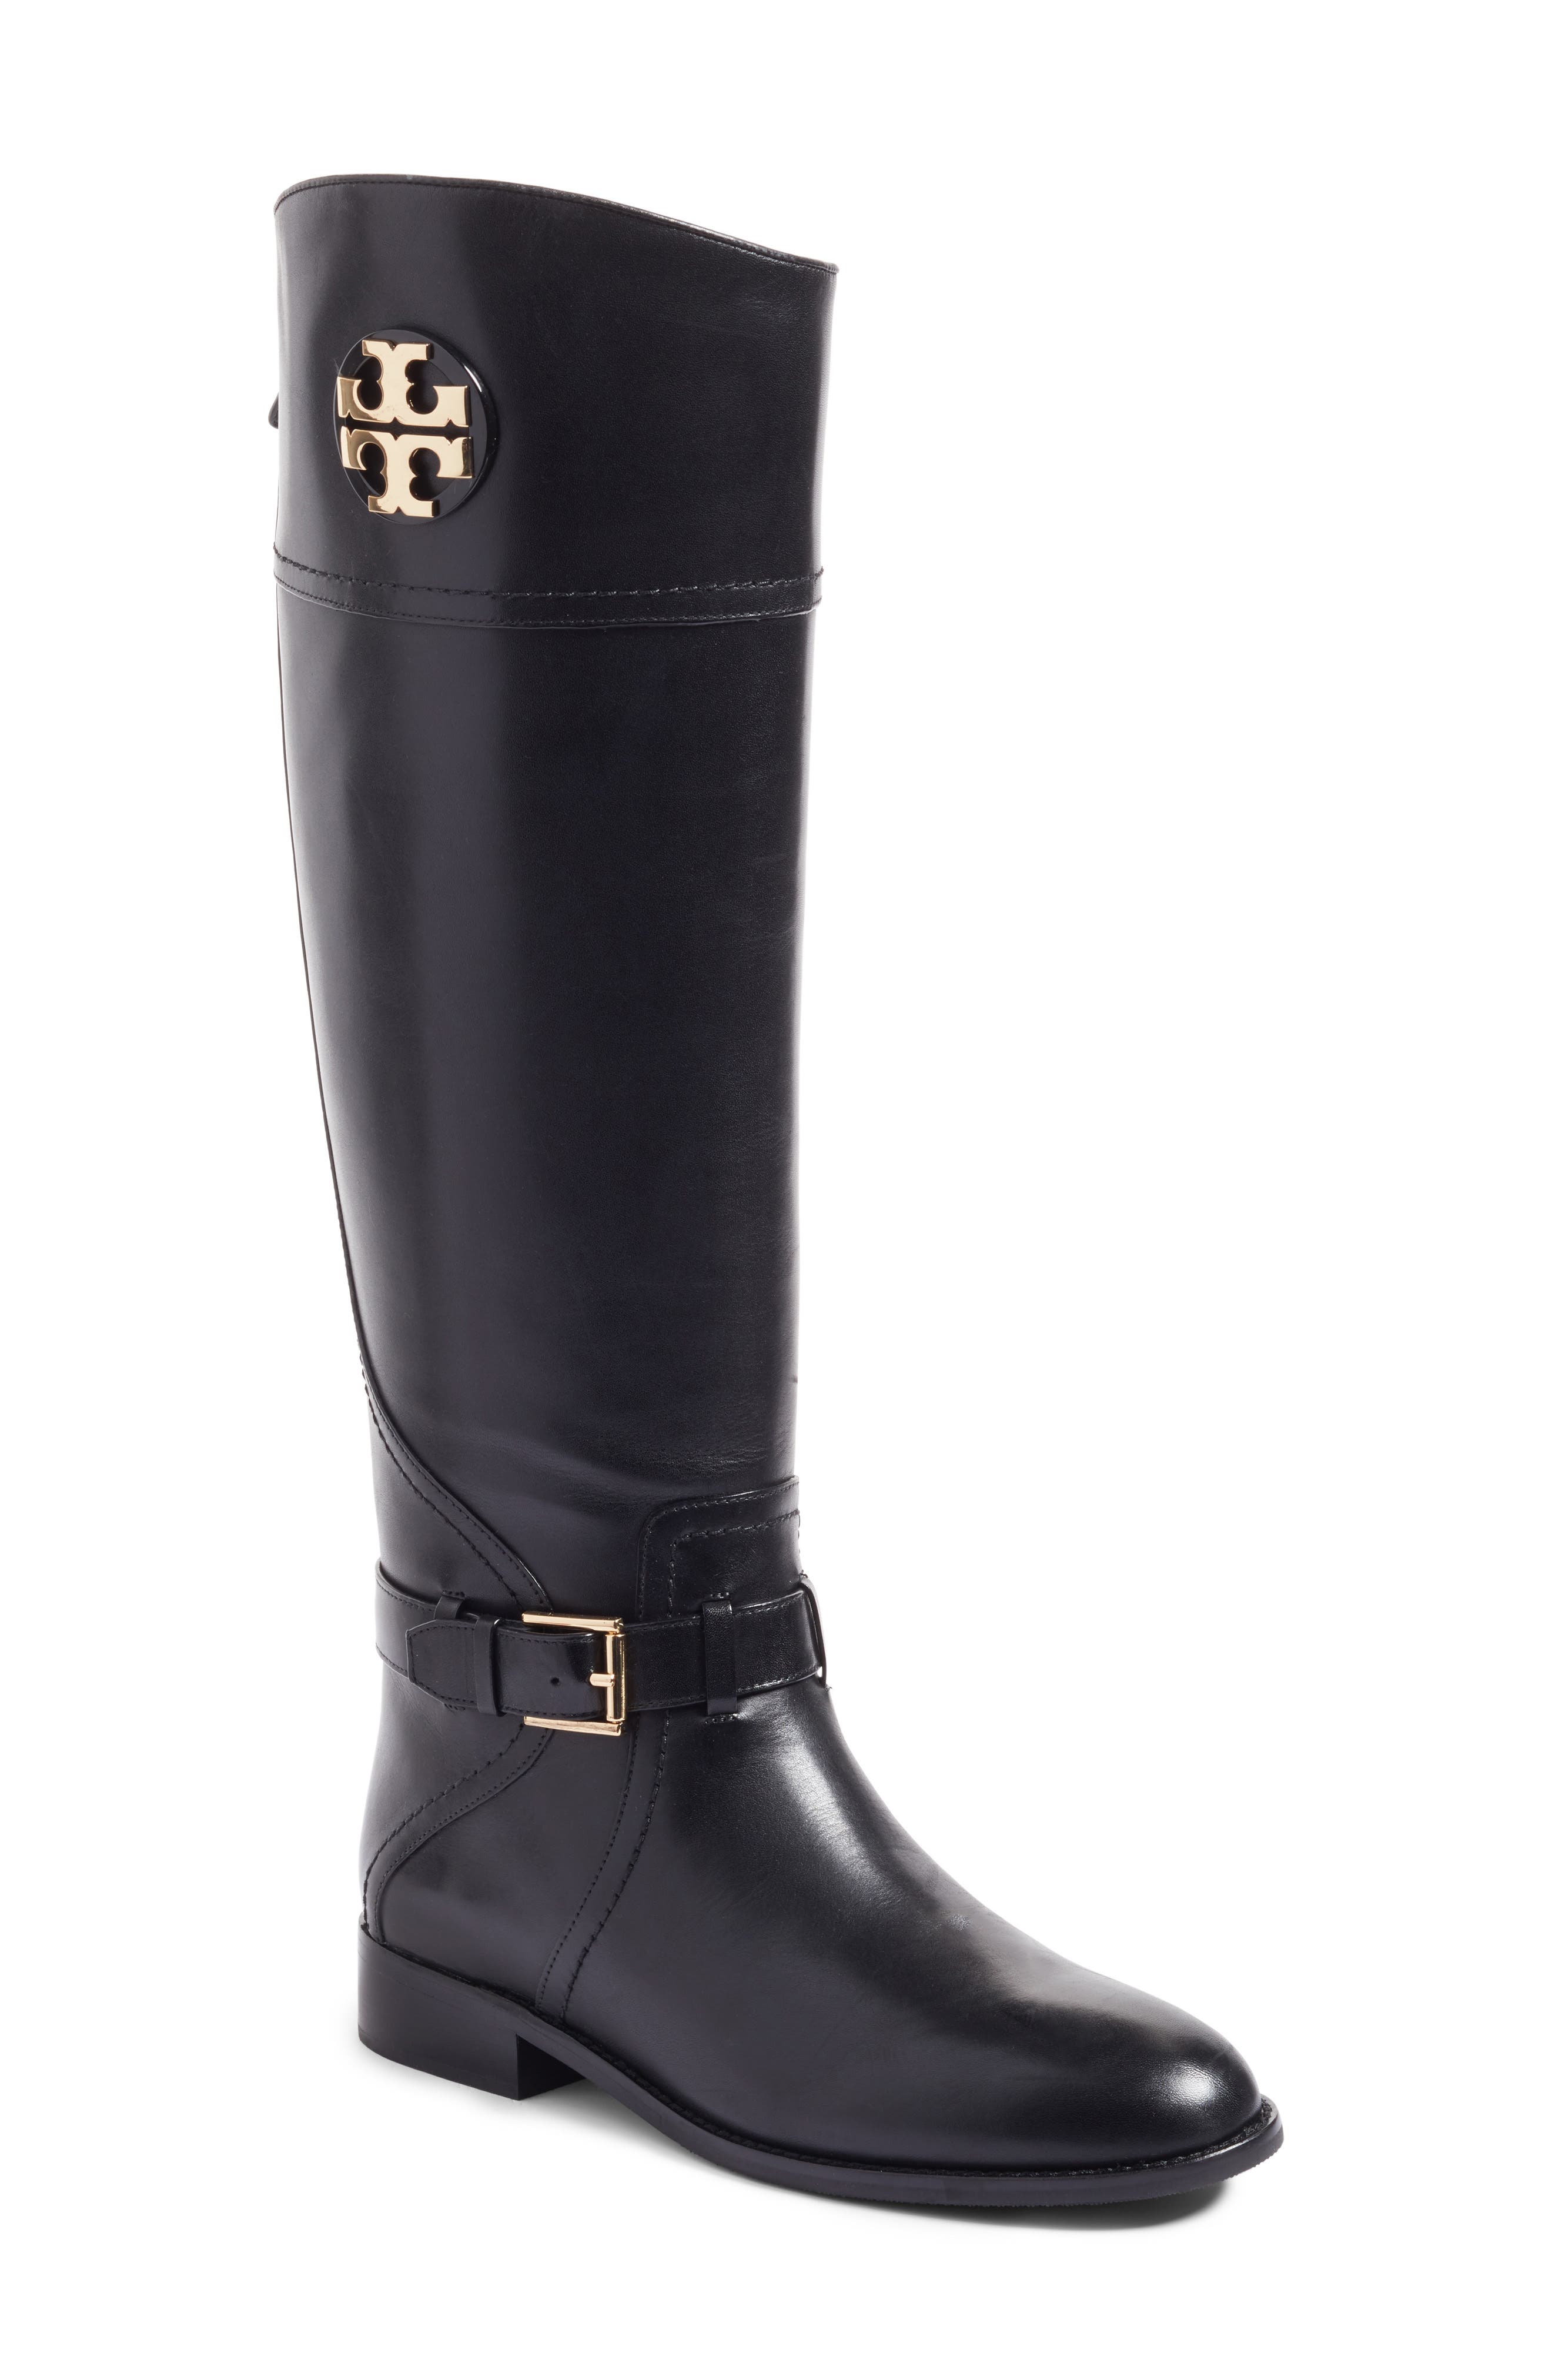 tory burch boots sale nordstrom